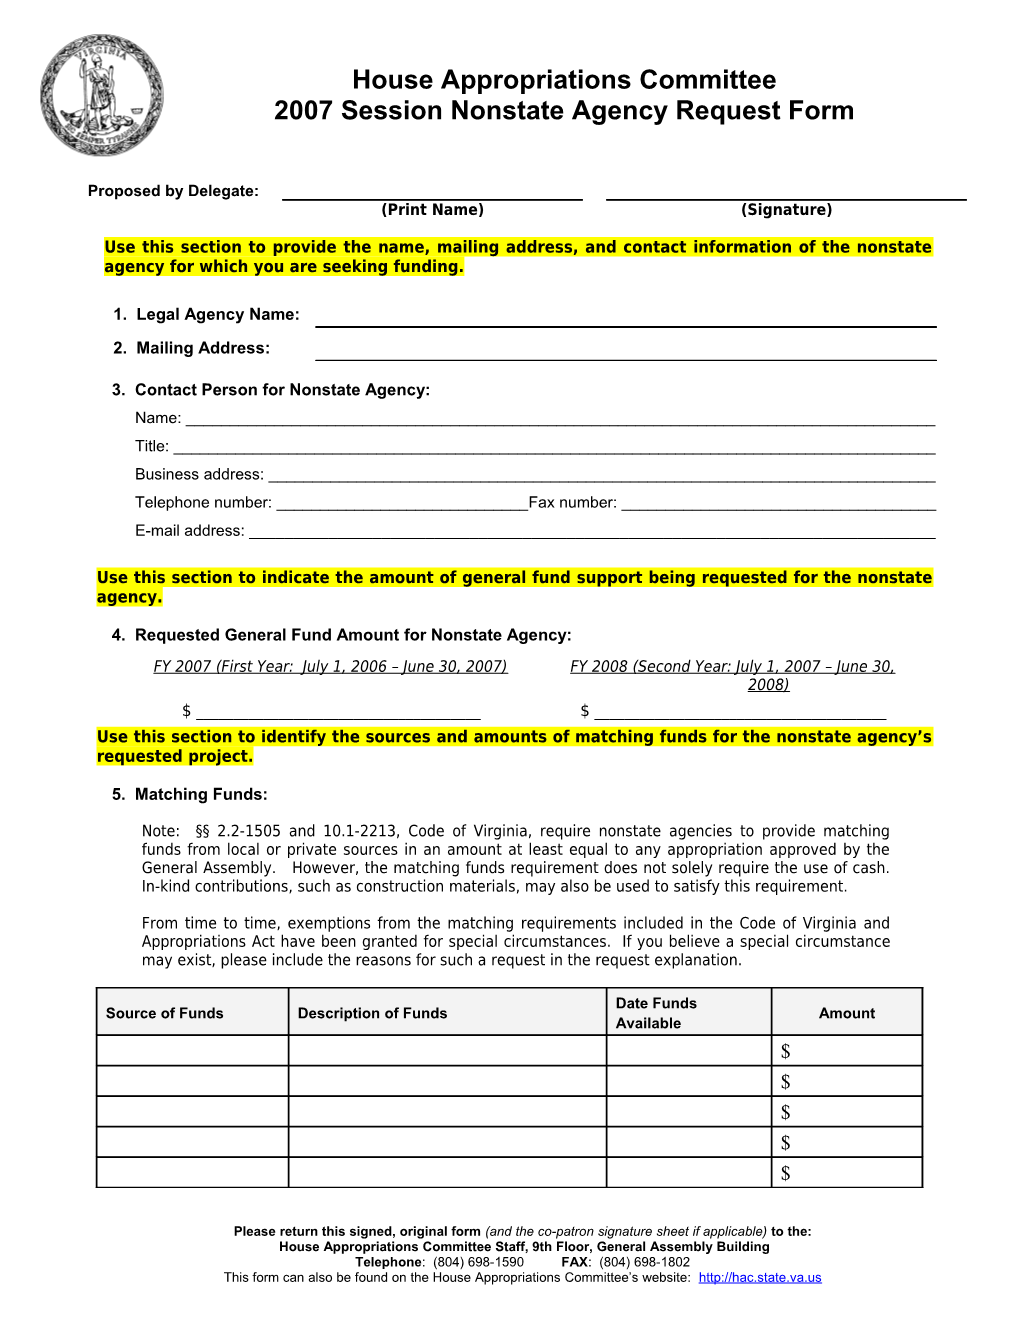 2007 Session Nonstate Agency Request Form